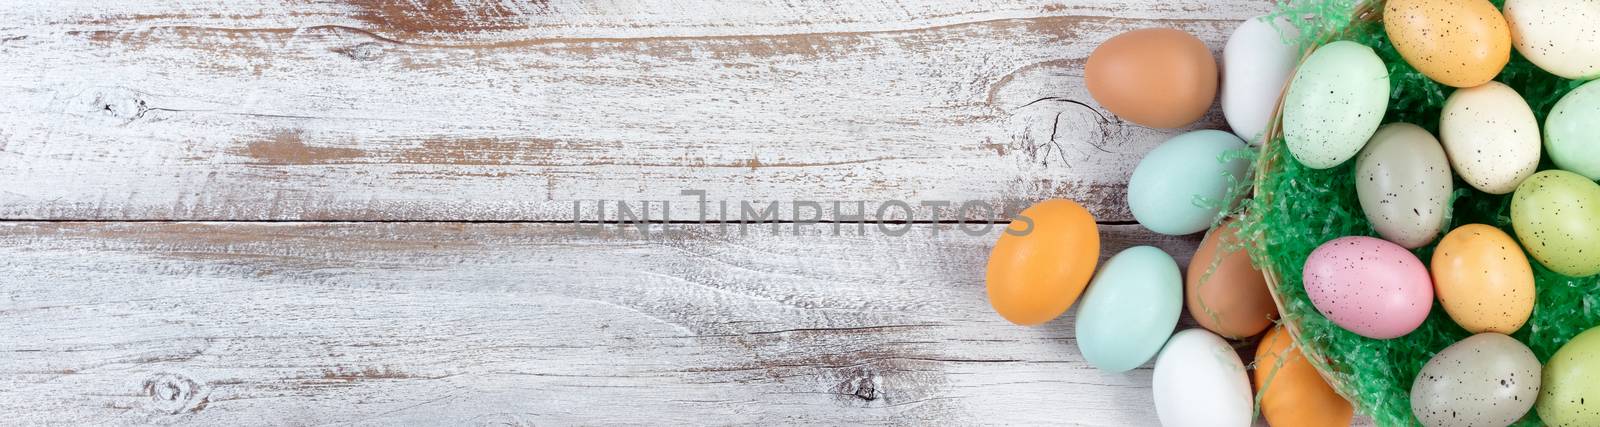 Basket filled with colorful eggs forming right border on rustic white wood for Easter concept 